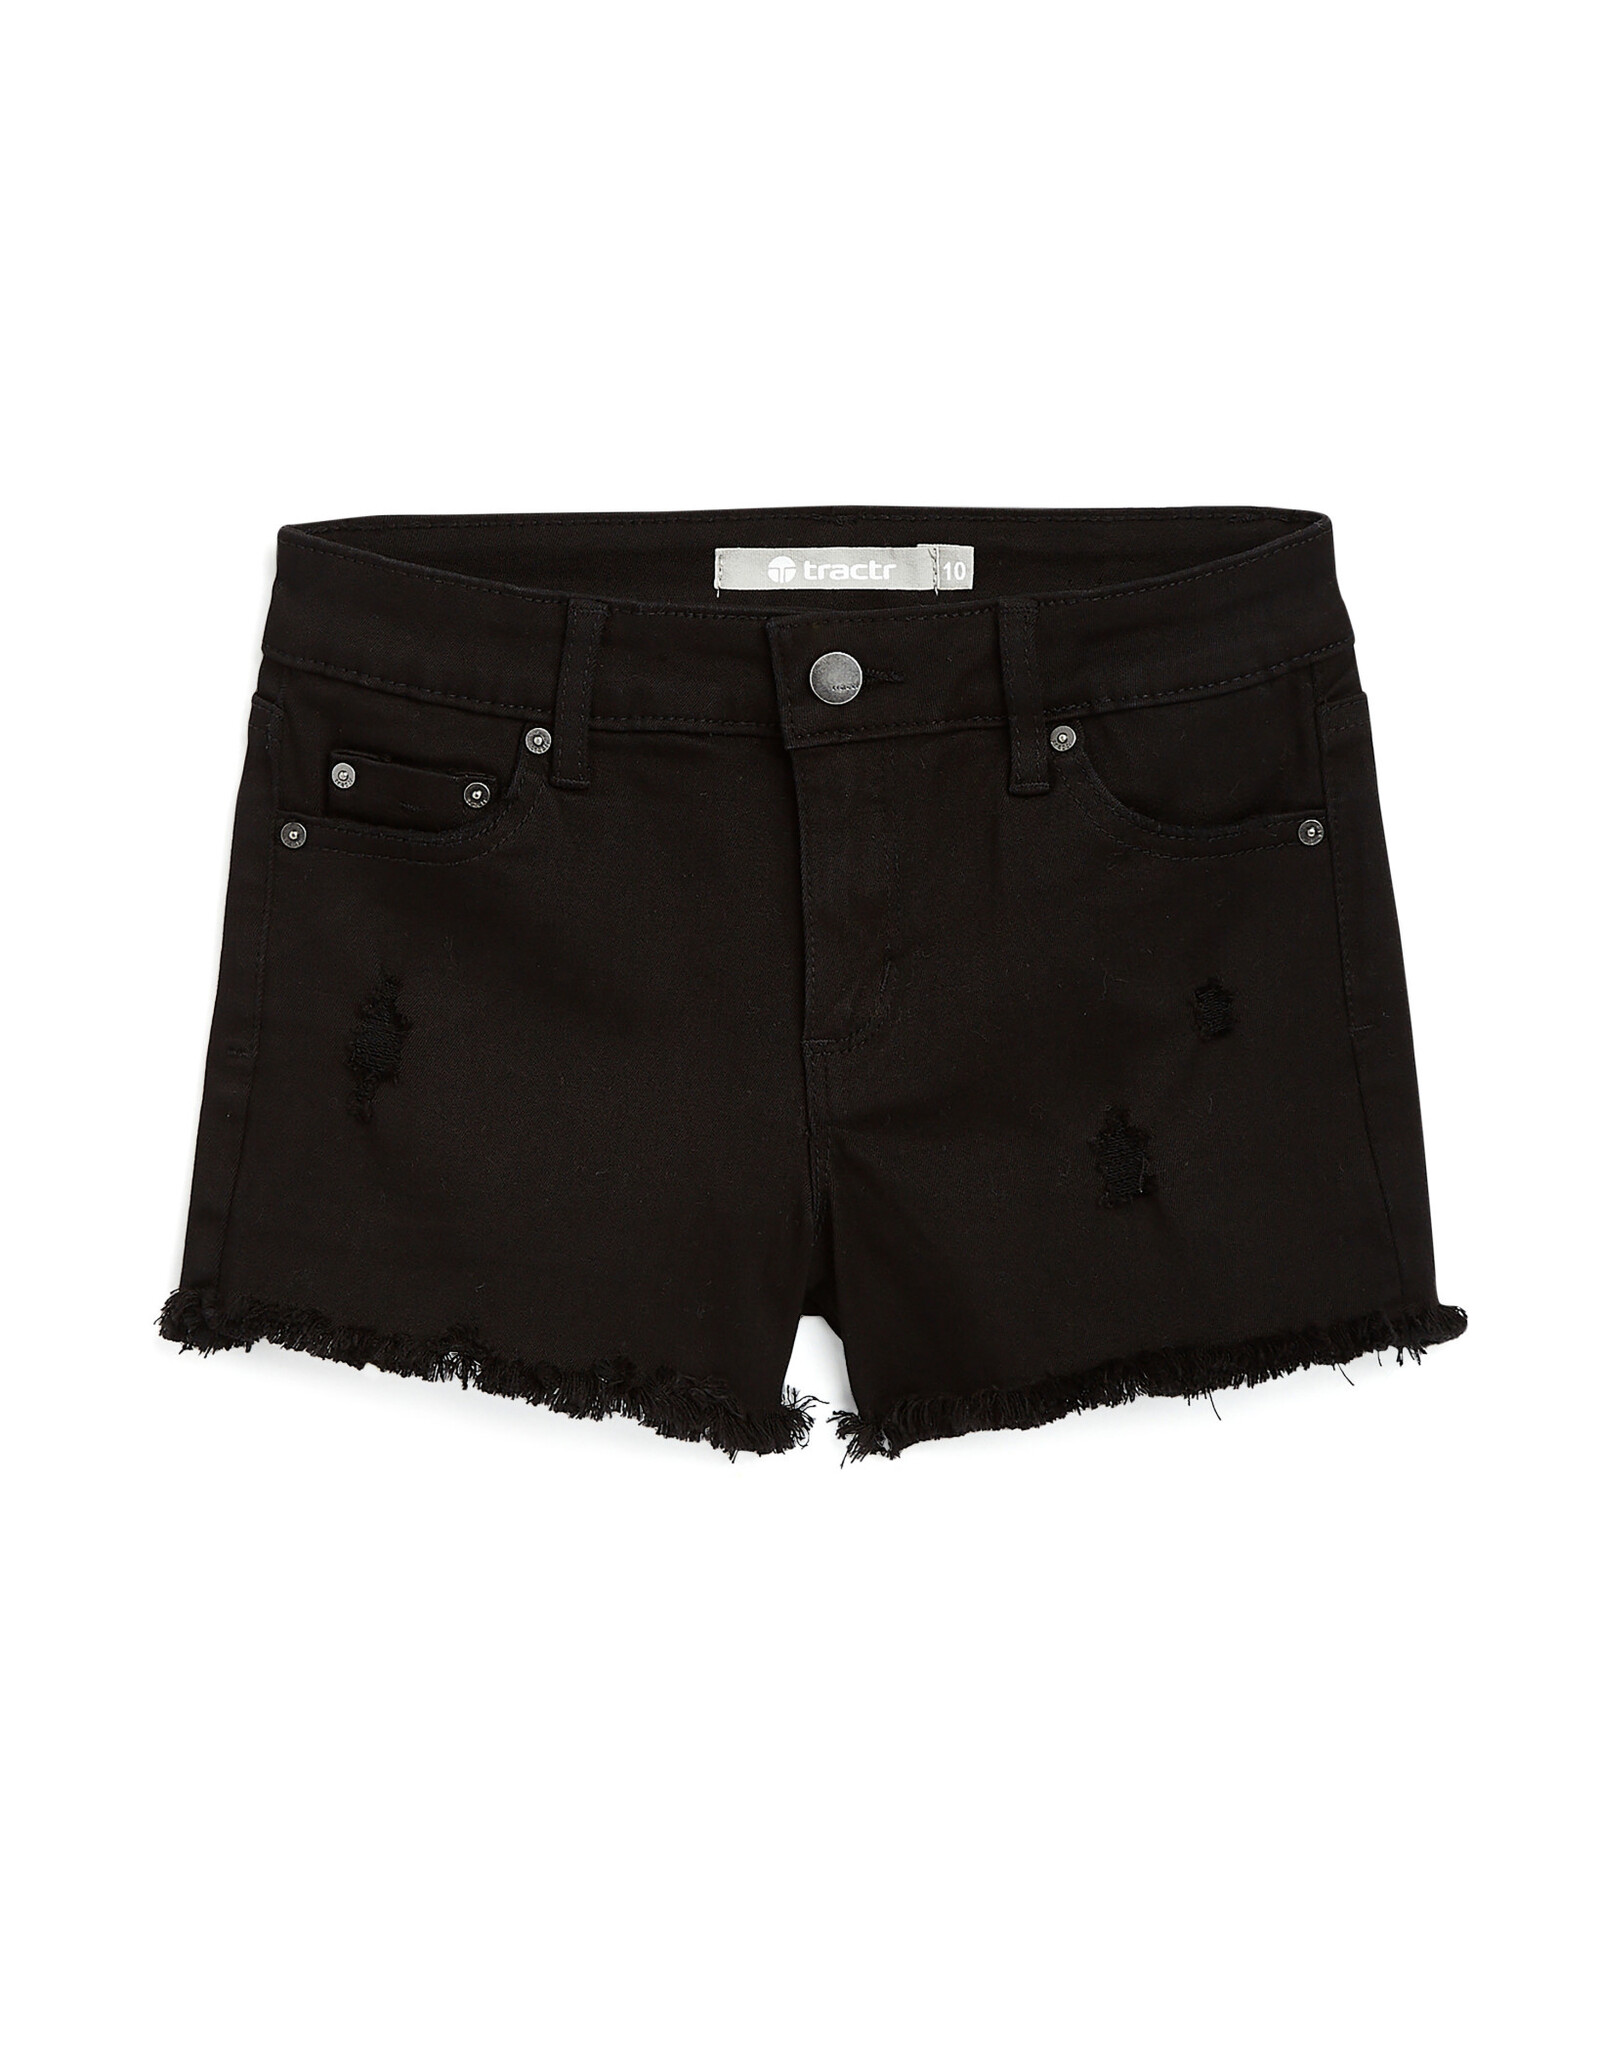 Tractr Girls Brittany 5pkt Fray Shorts